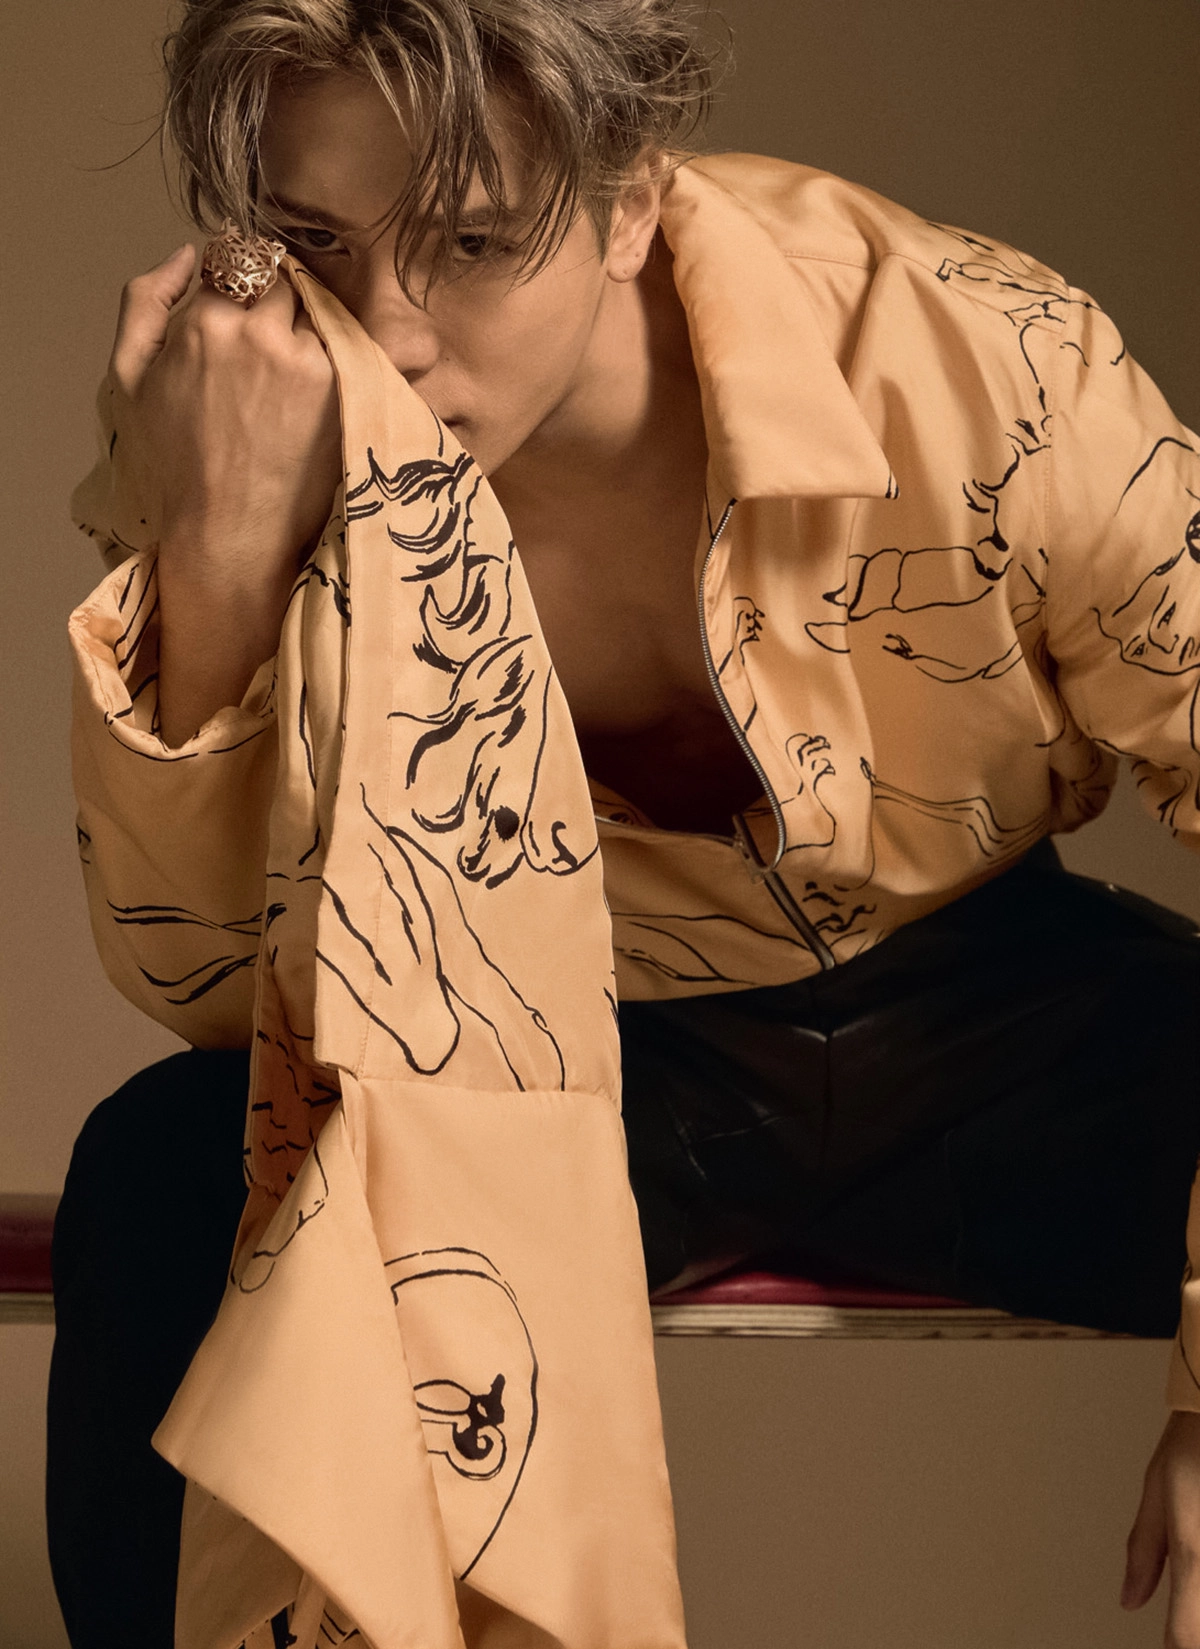 Jackson Wang covers Vogue Singapore October 2022 by Thomas Giddings